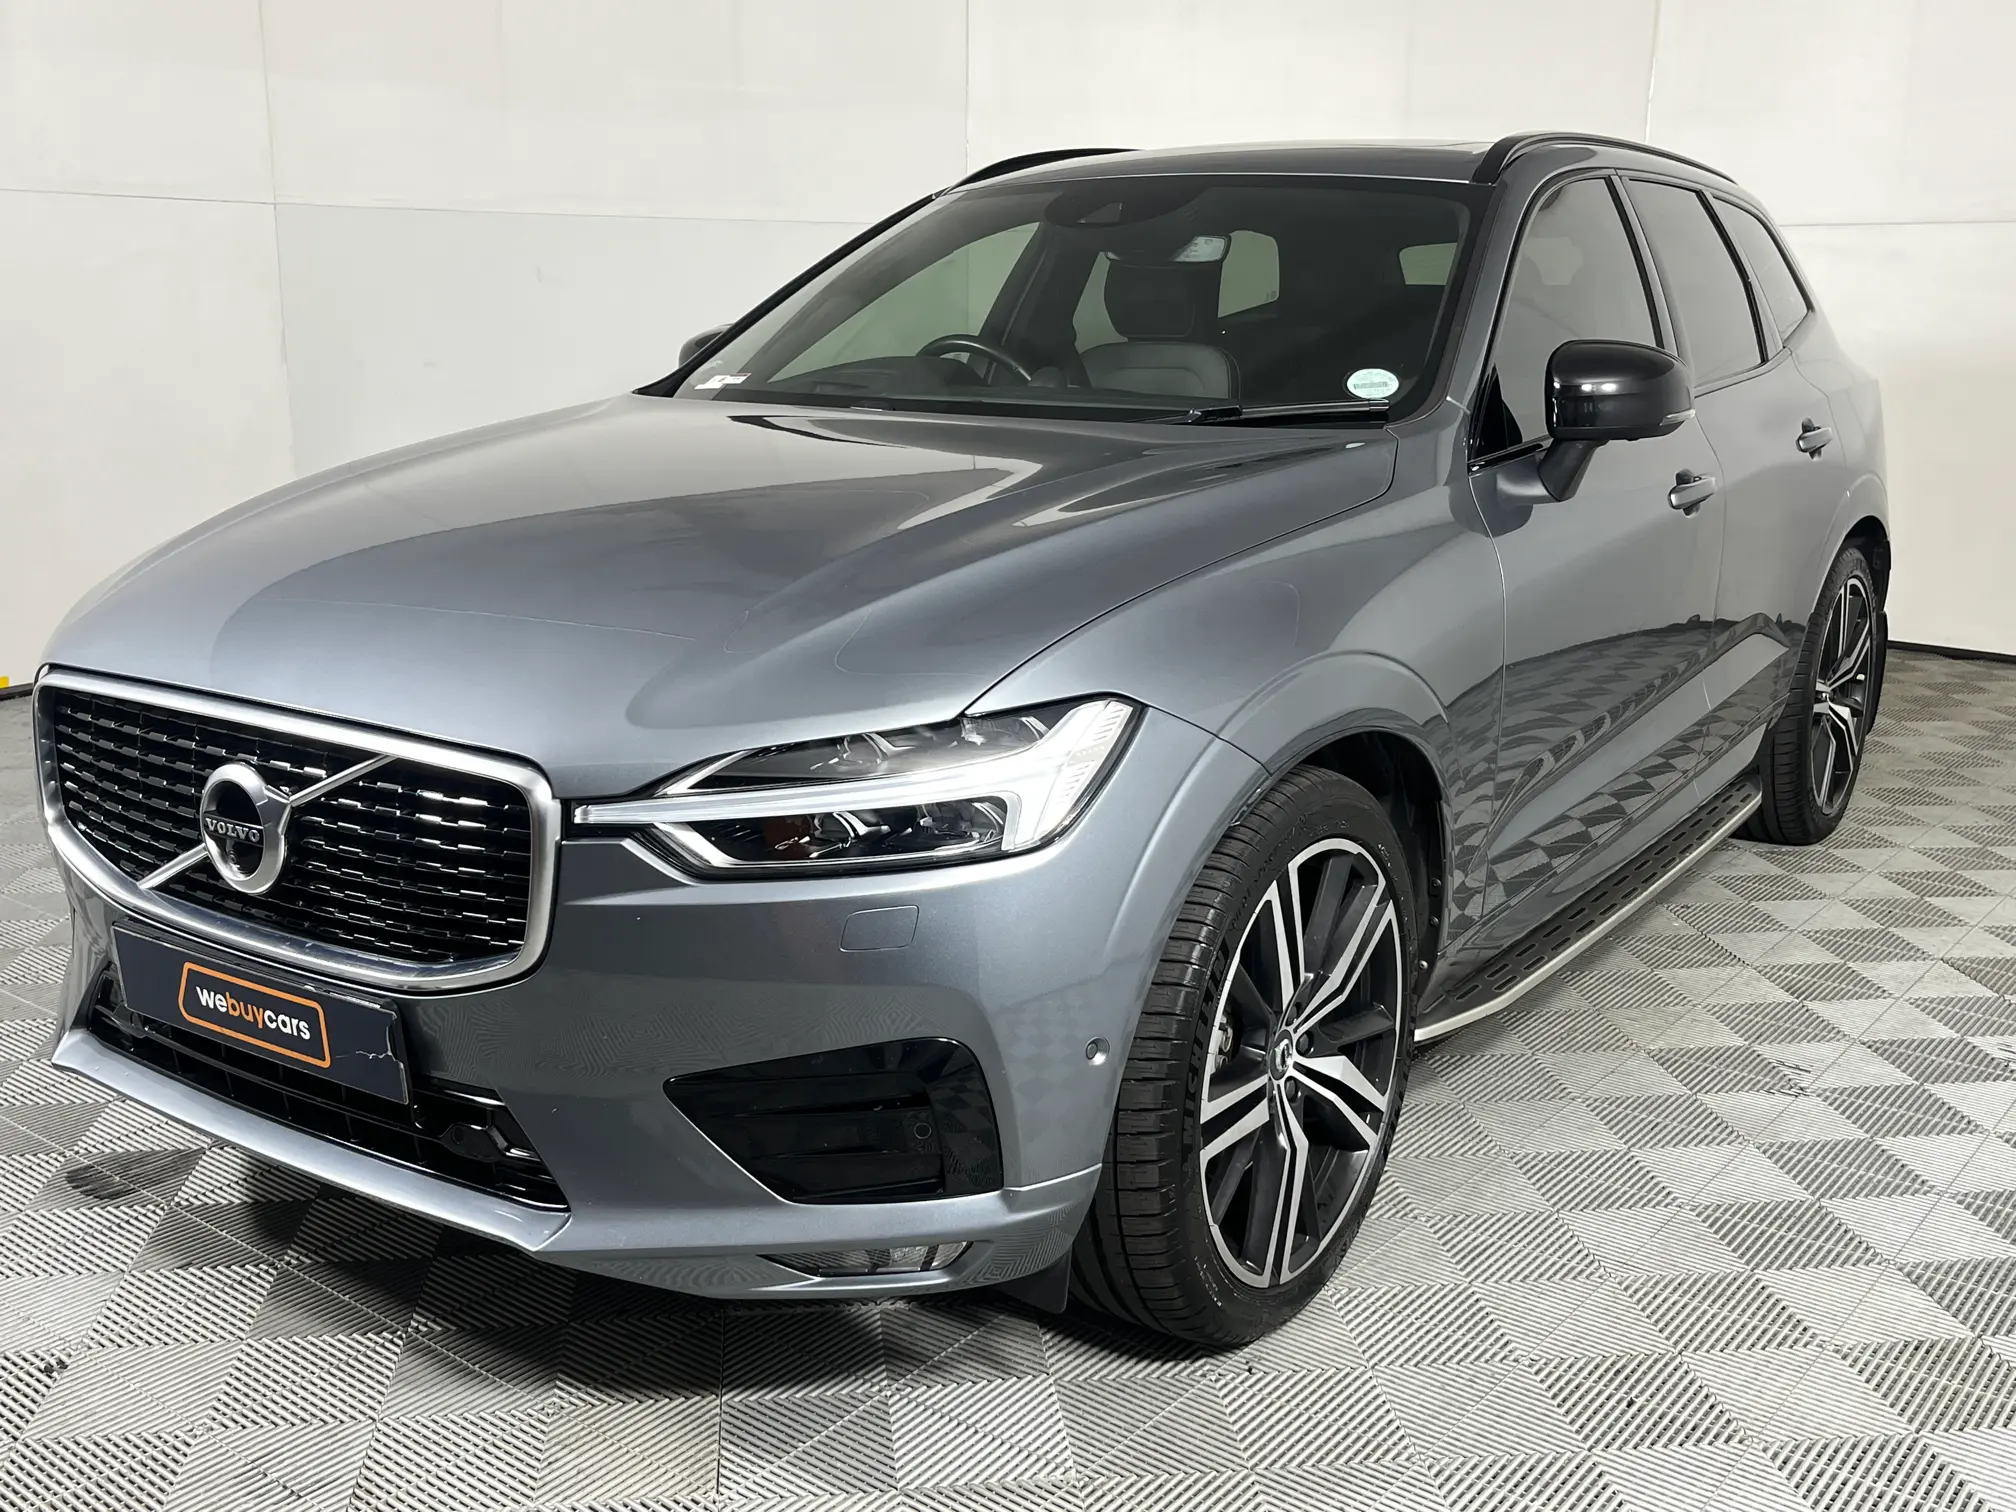 2021 Volvo Xc60 D5 R-Design Geartronic AWD